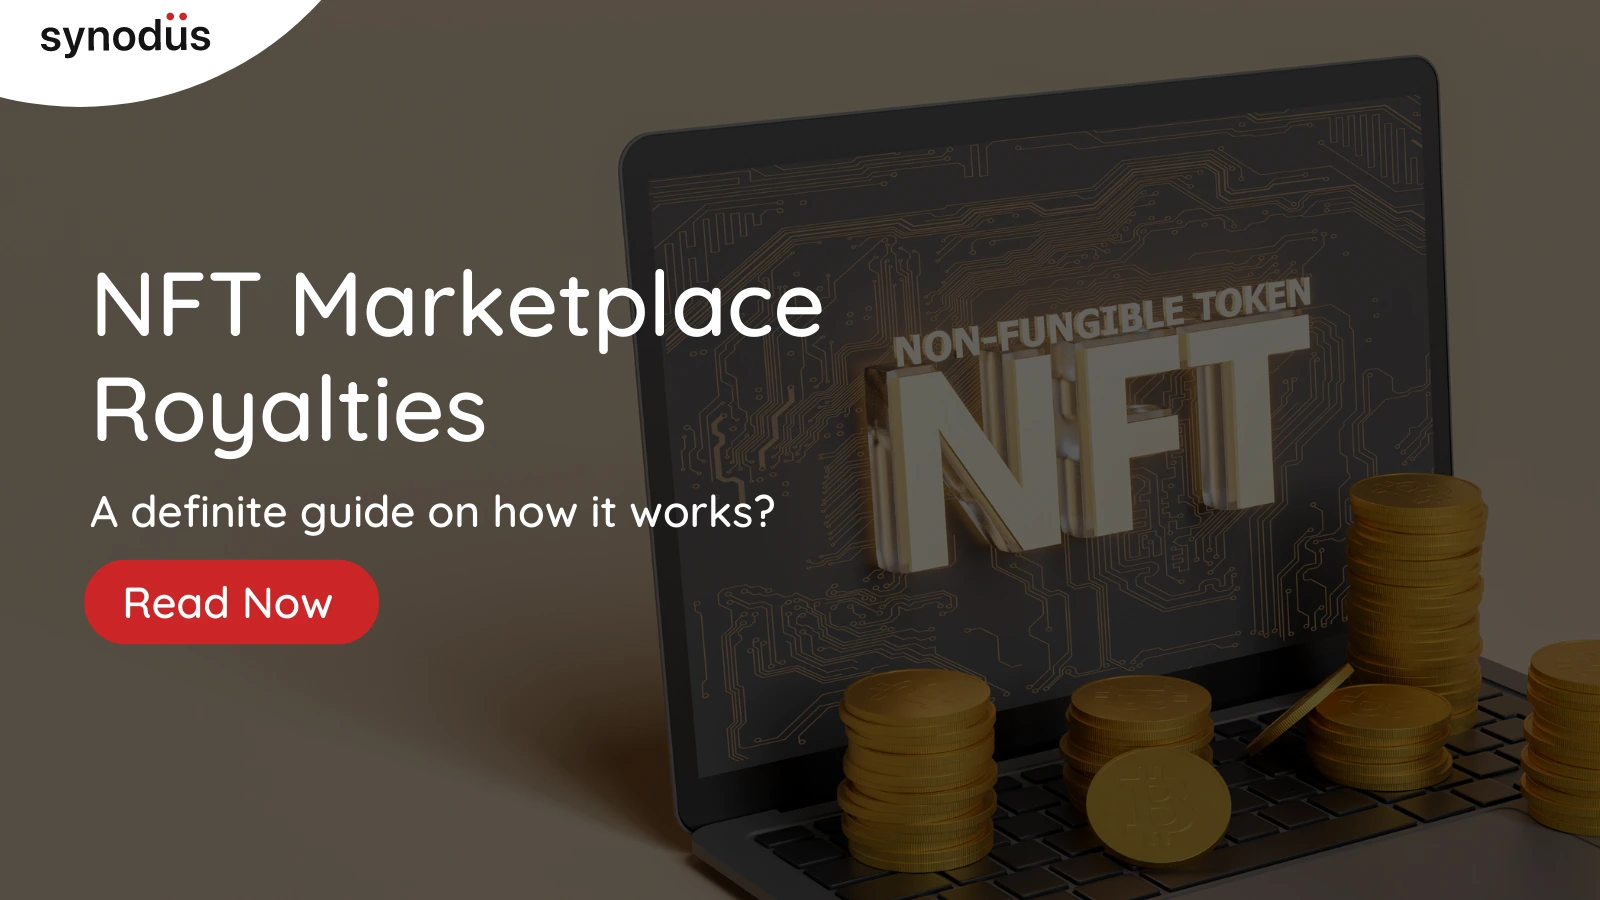 NFT-Marketplace-Royalties-A-definite-guide-on-how-it-works